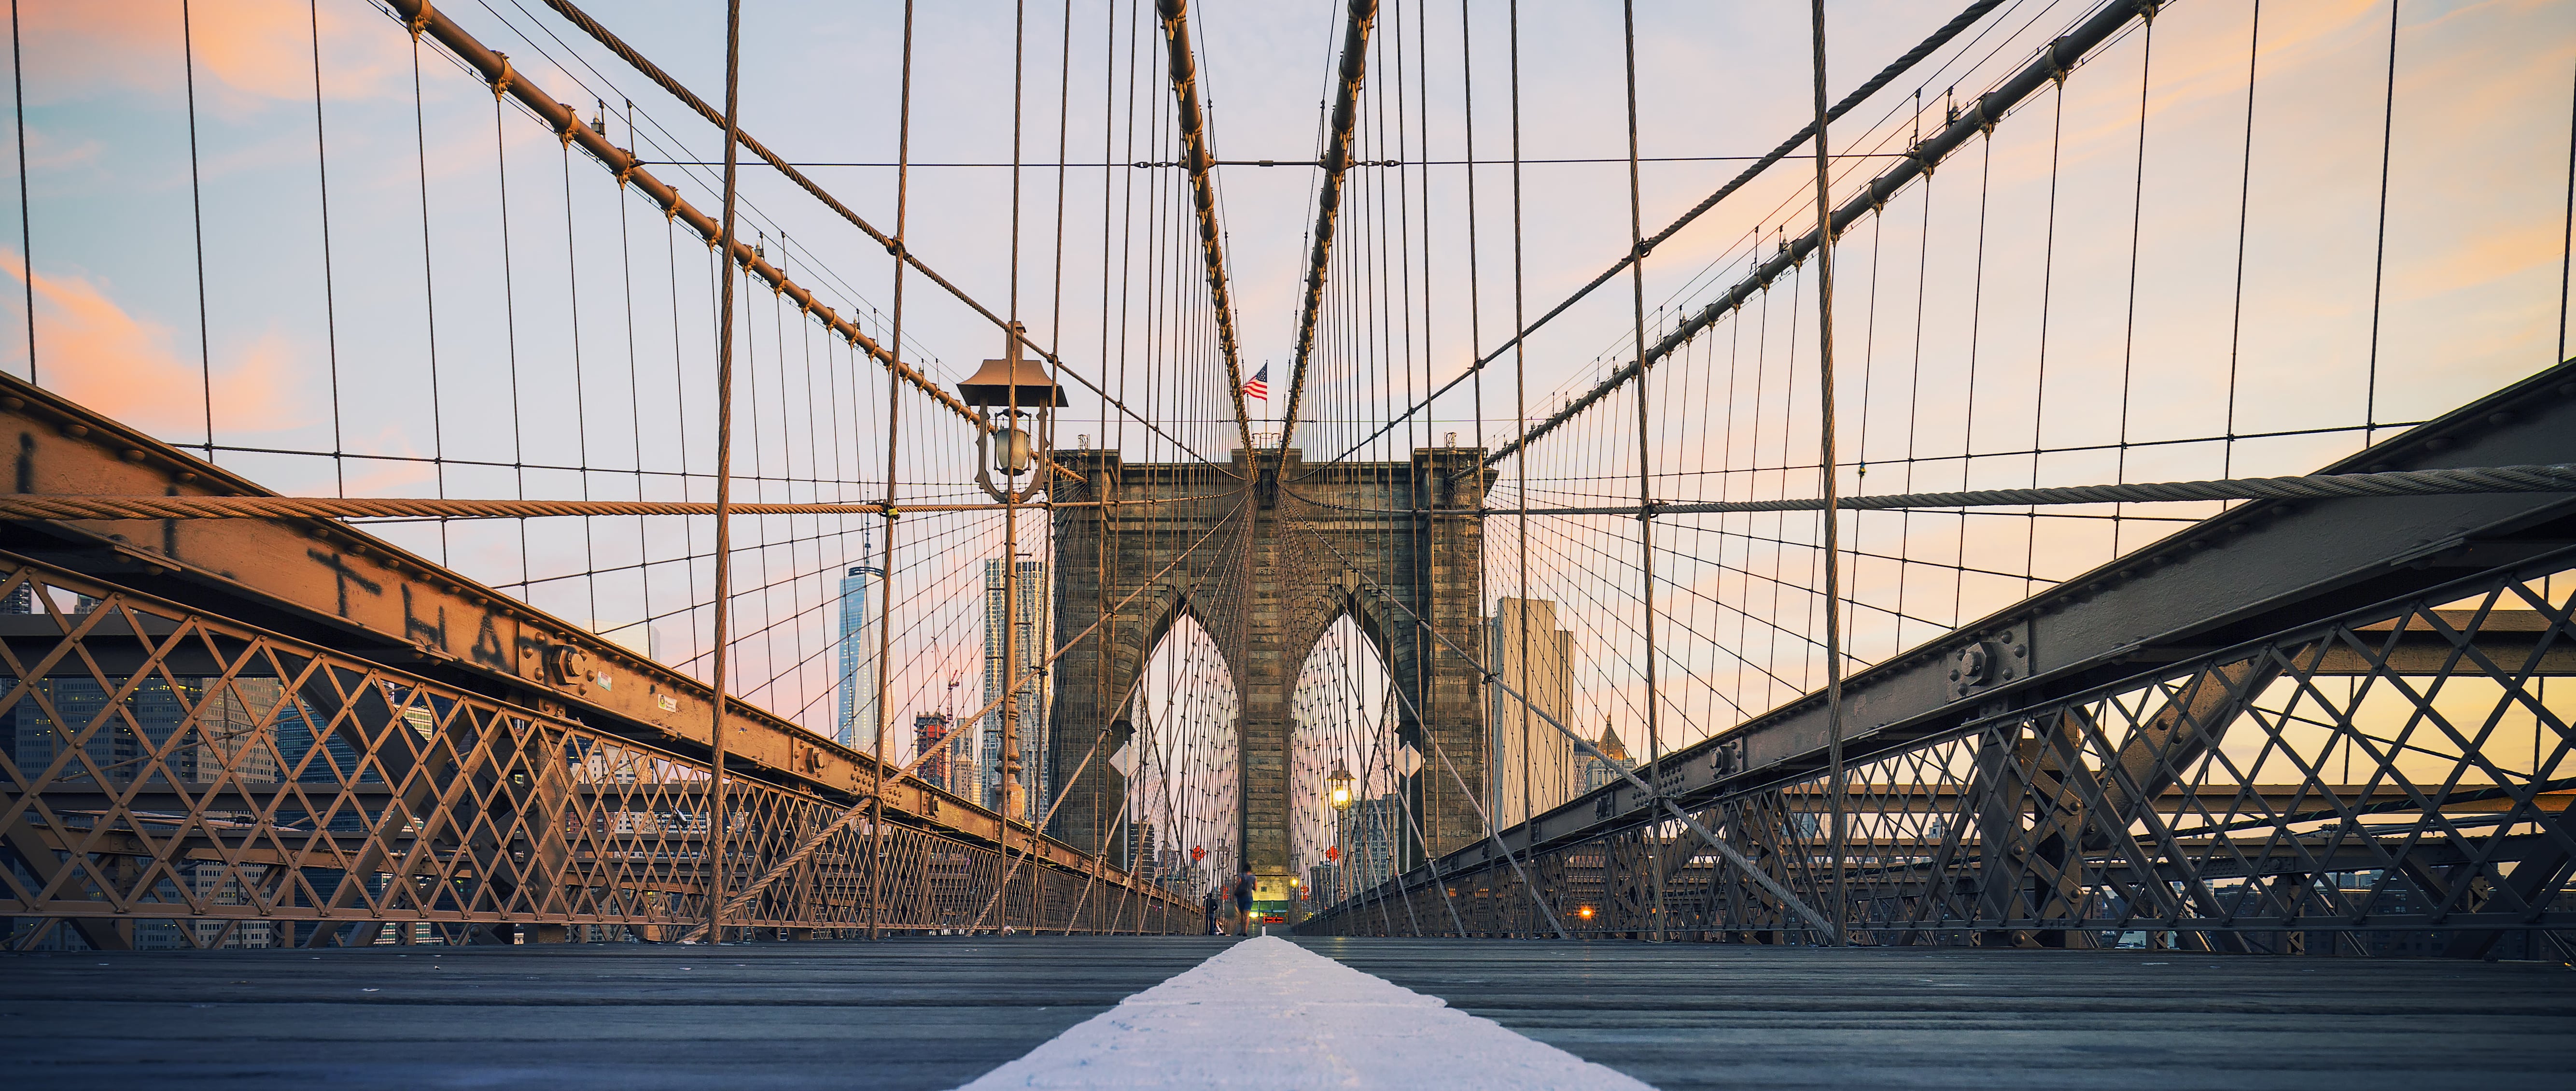 Fun Facts To Know About the Brooklyn Bridge